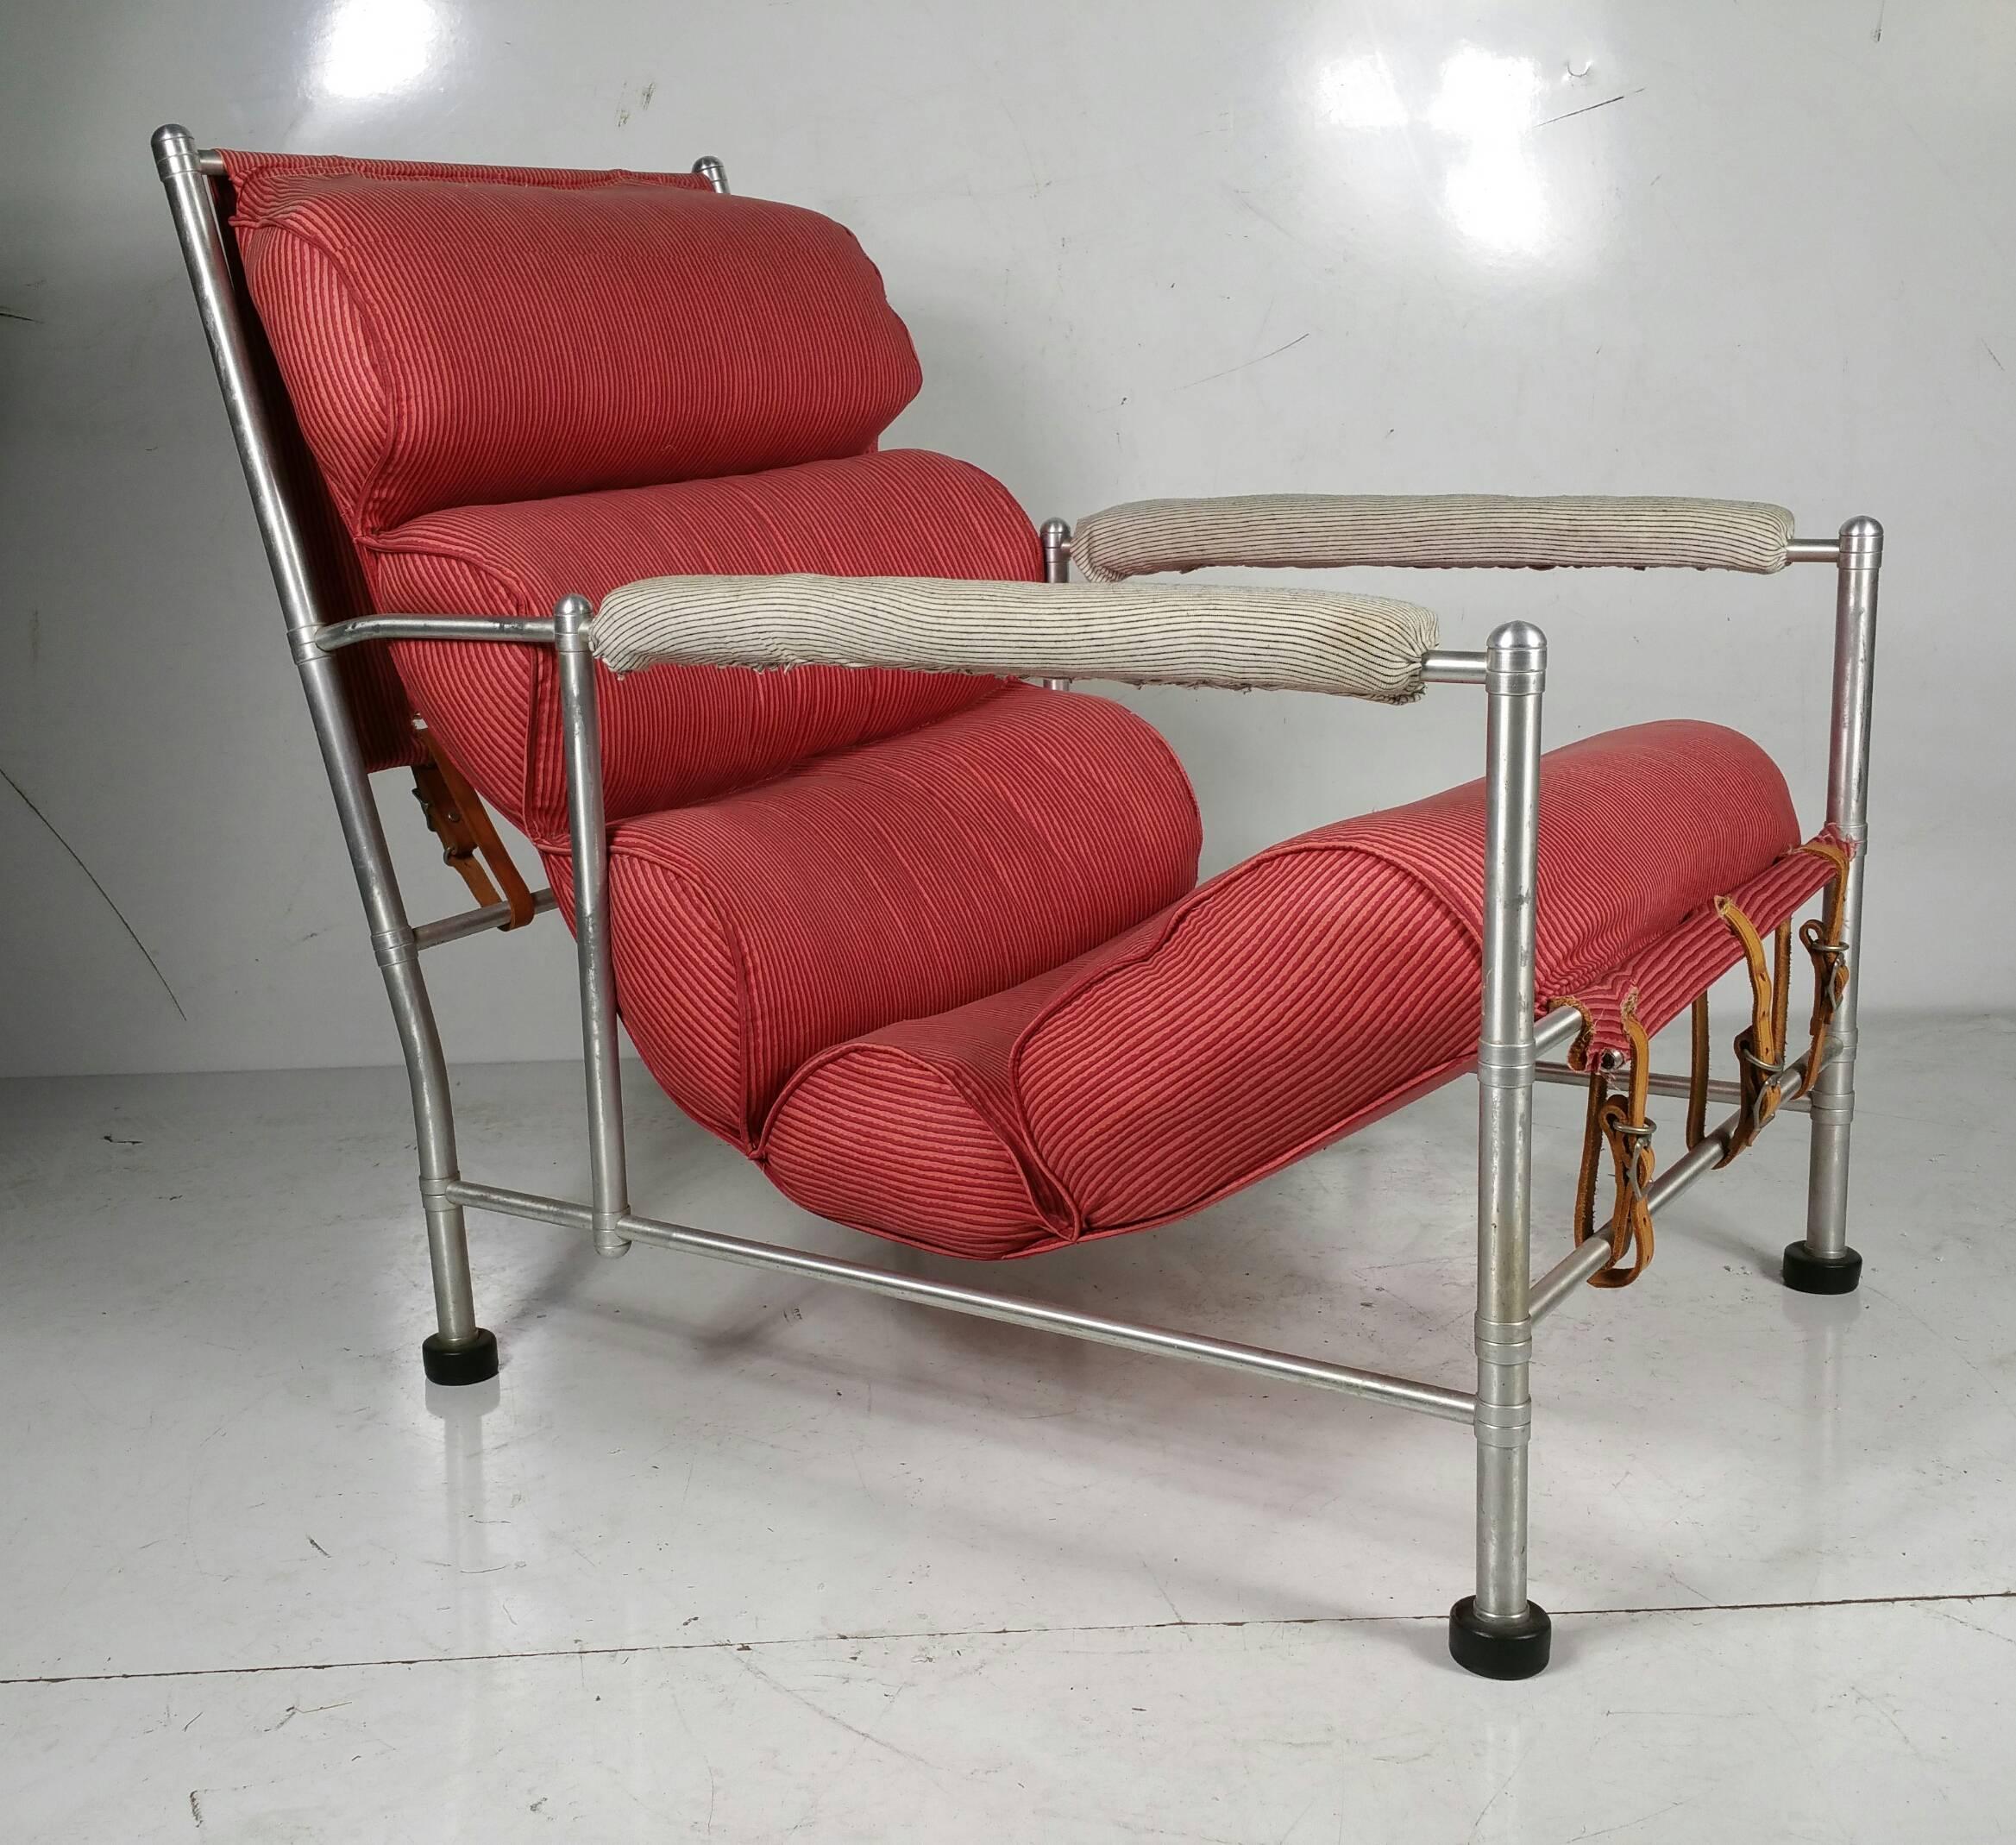 Streamlined Art Deco Lounge Chair, designed by Warren McArthur, circa 1930's. Retains warm original patina to aluminum. Currently upholstered in a cotton fabric.. 